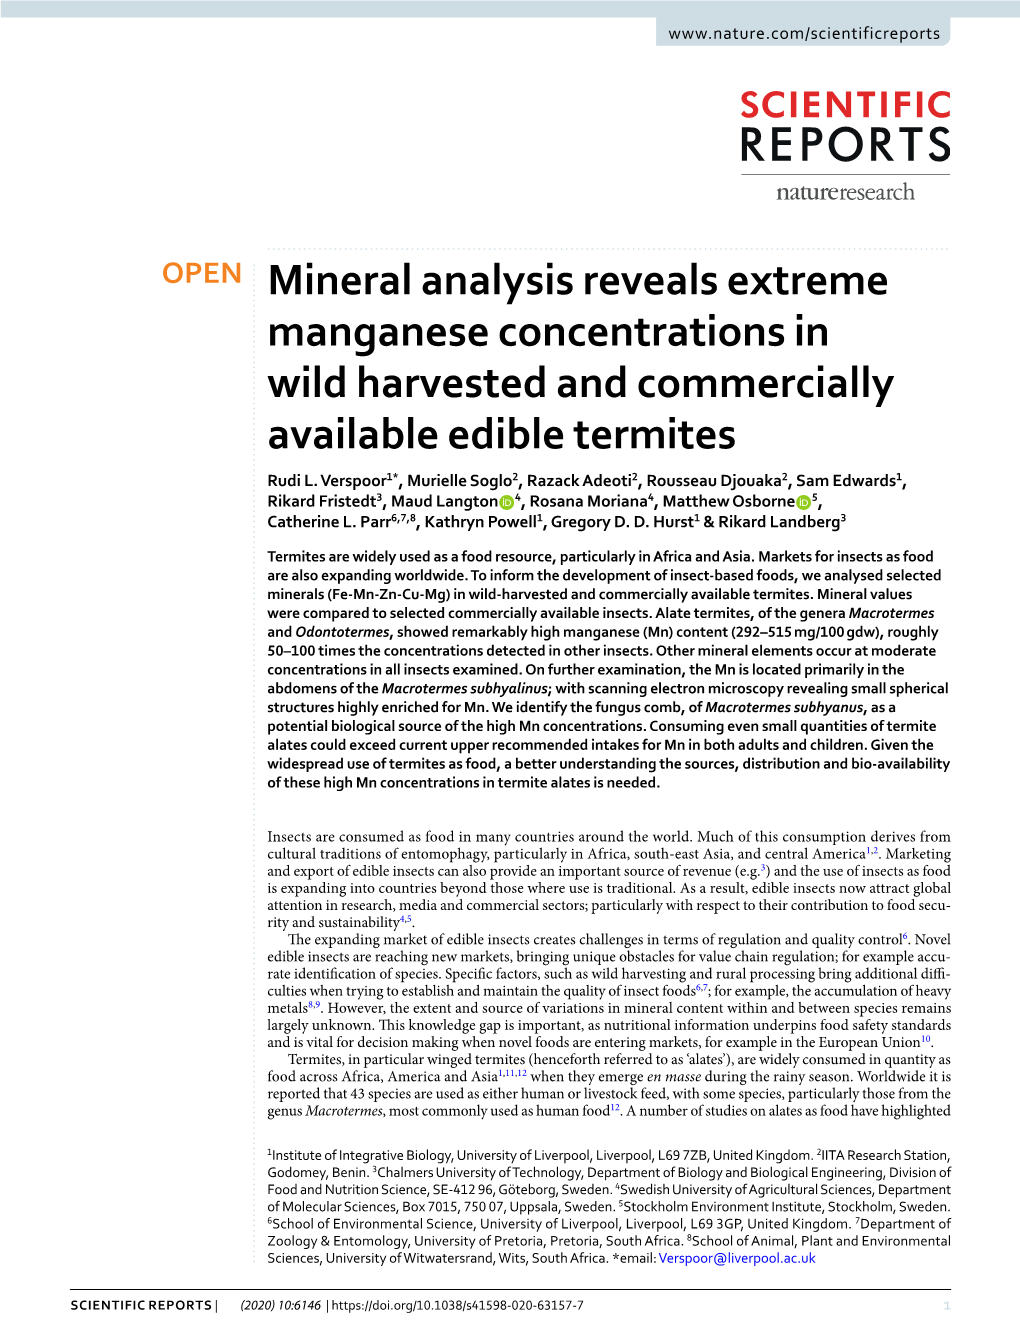 Mineral Analysis Reveals Extreme Manganese Concentrations in Wild Harvested and Commercially Available Edible Termites Rudi L